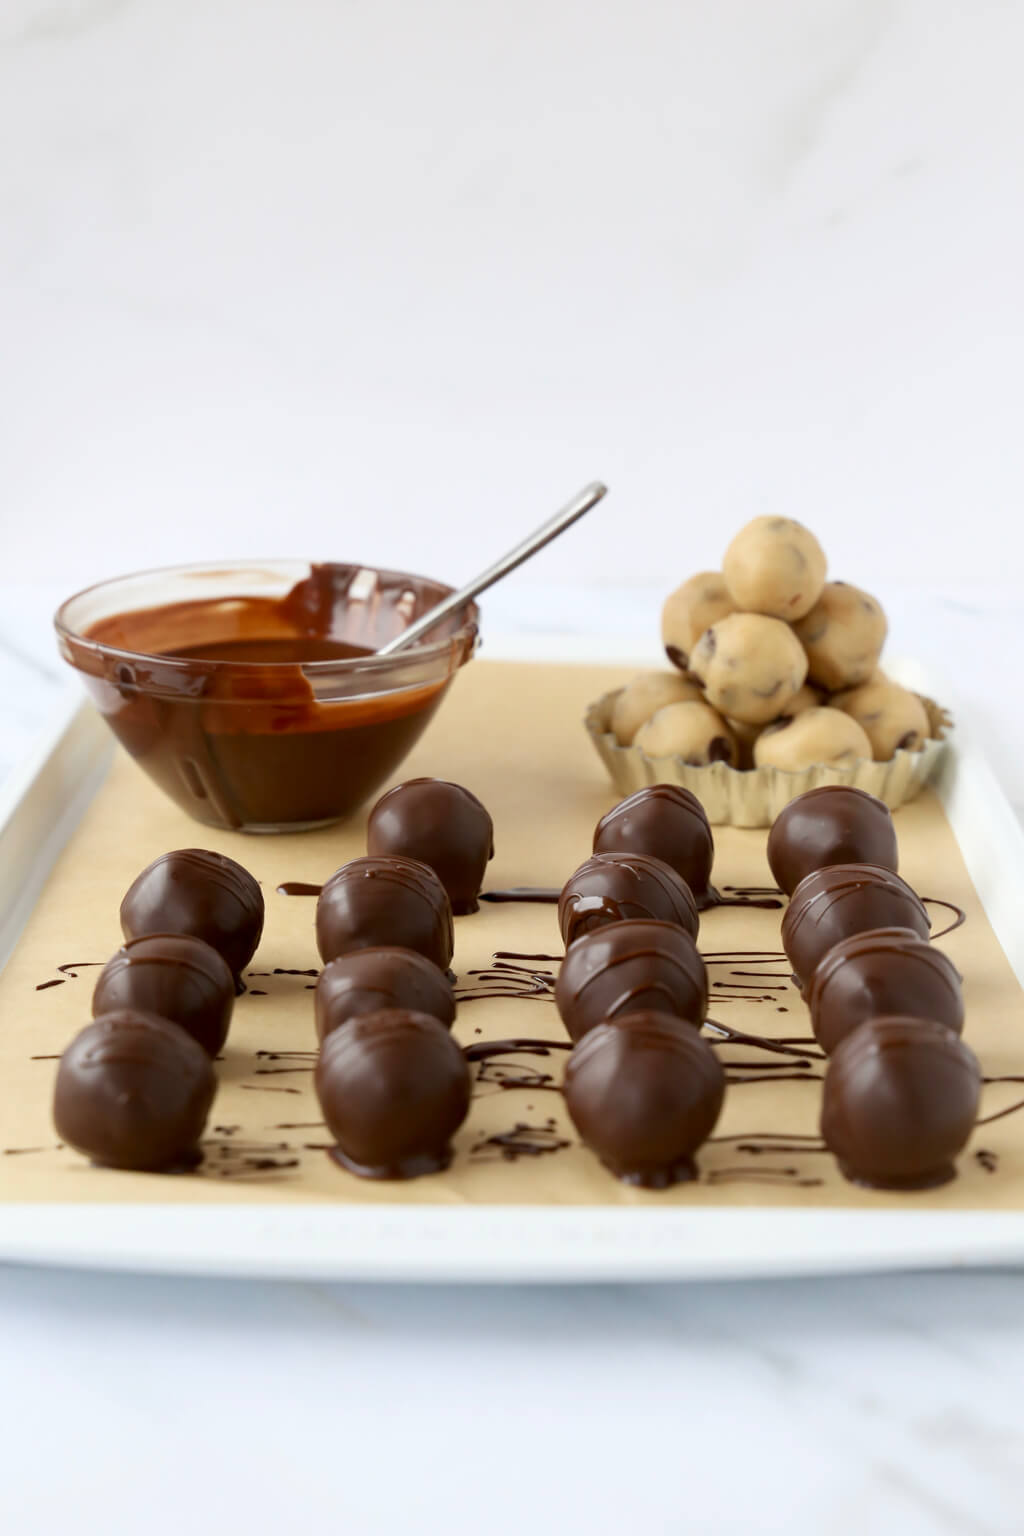 A tray of chocolate chip cookie dough balls that have just been dipped in chocolate glaze